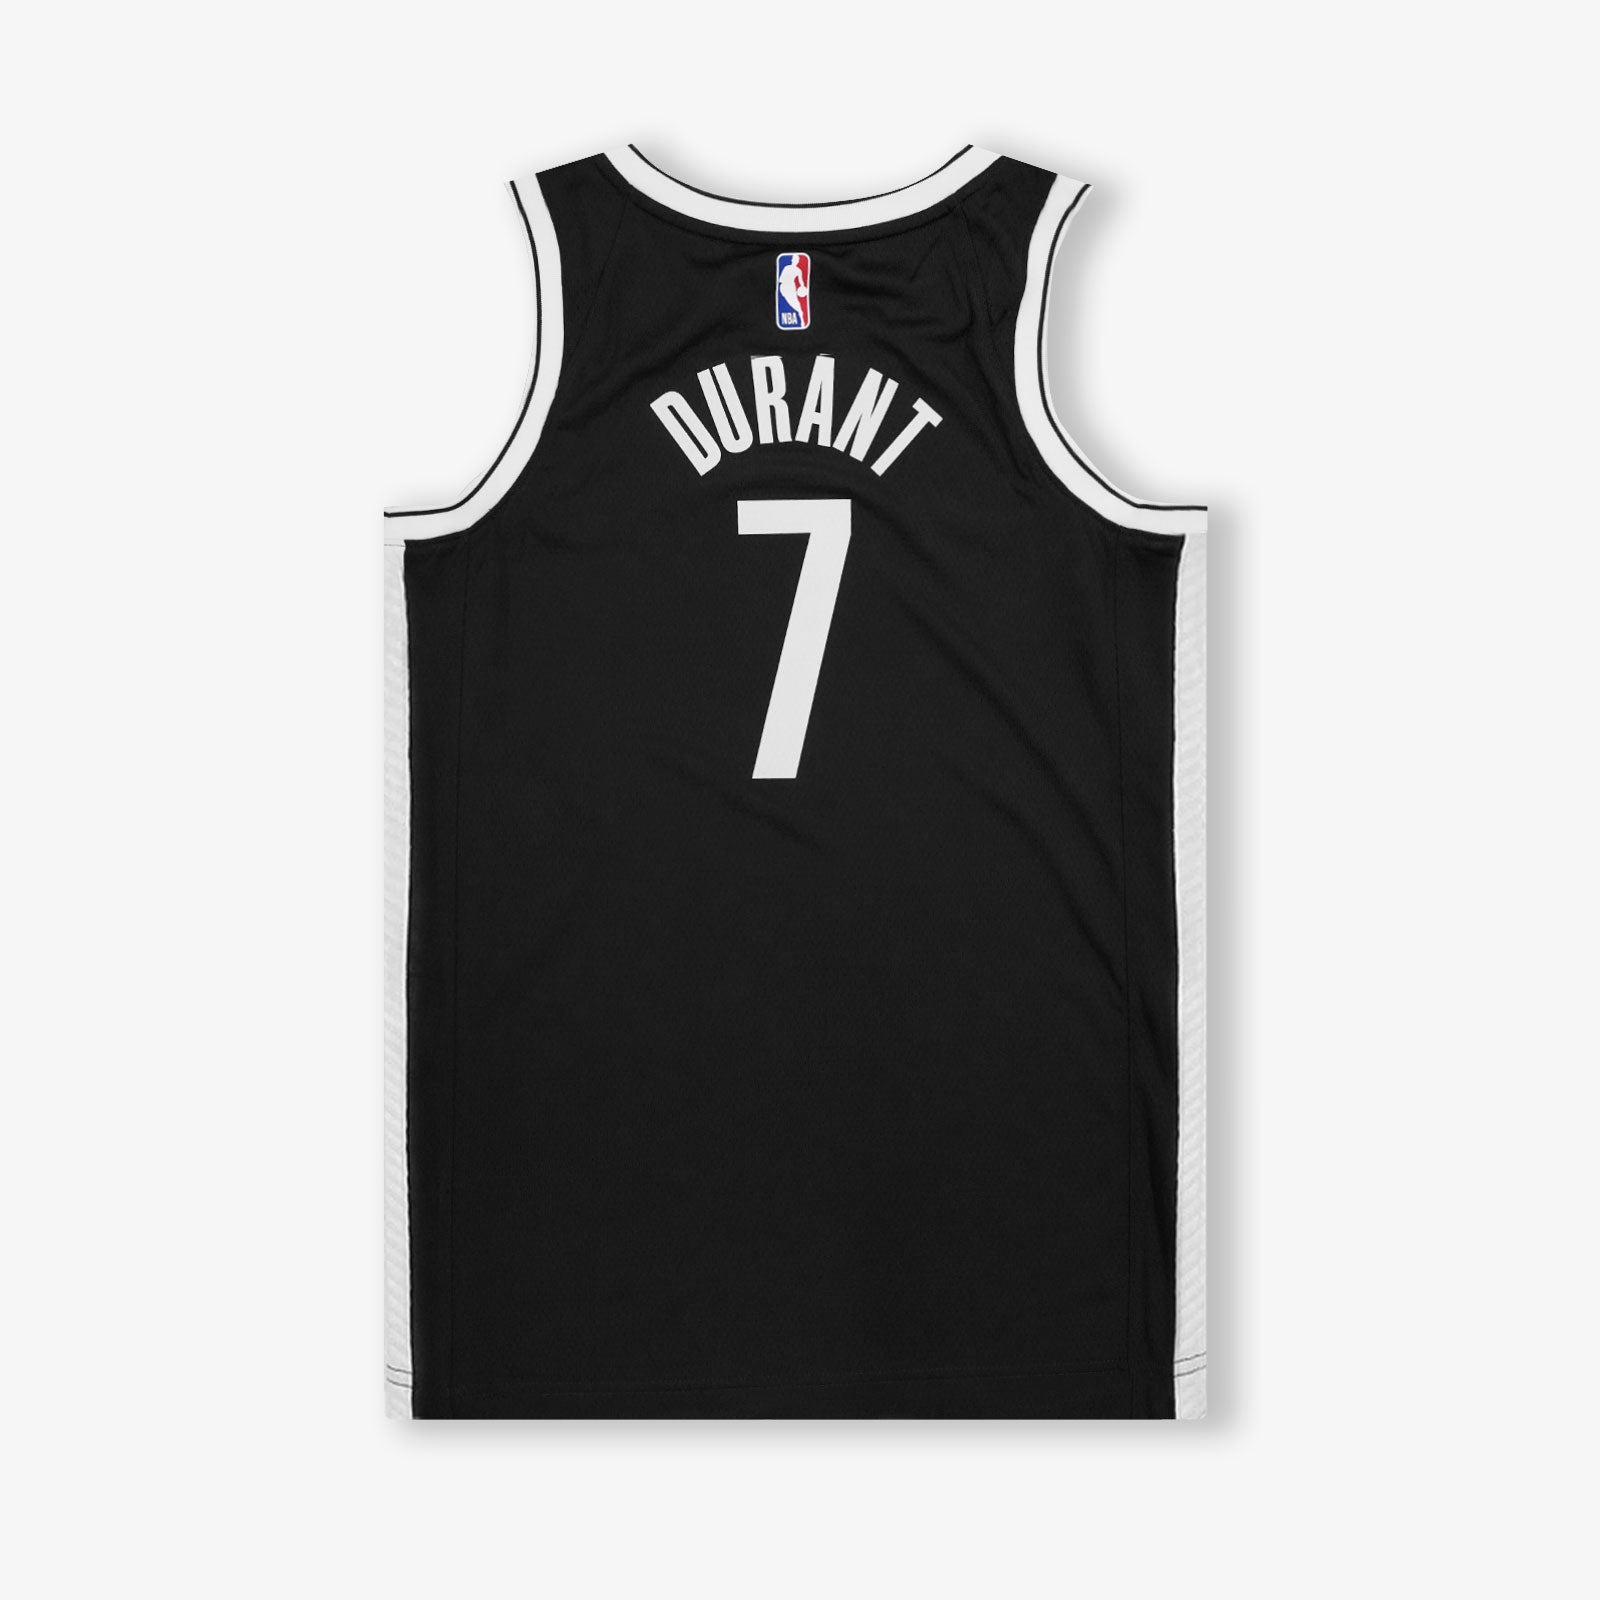 kevin durant retro nets jersey